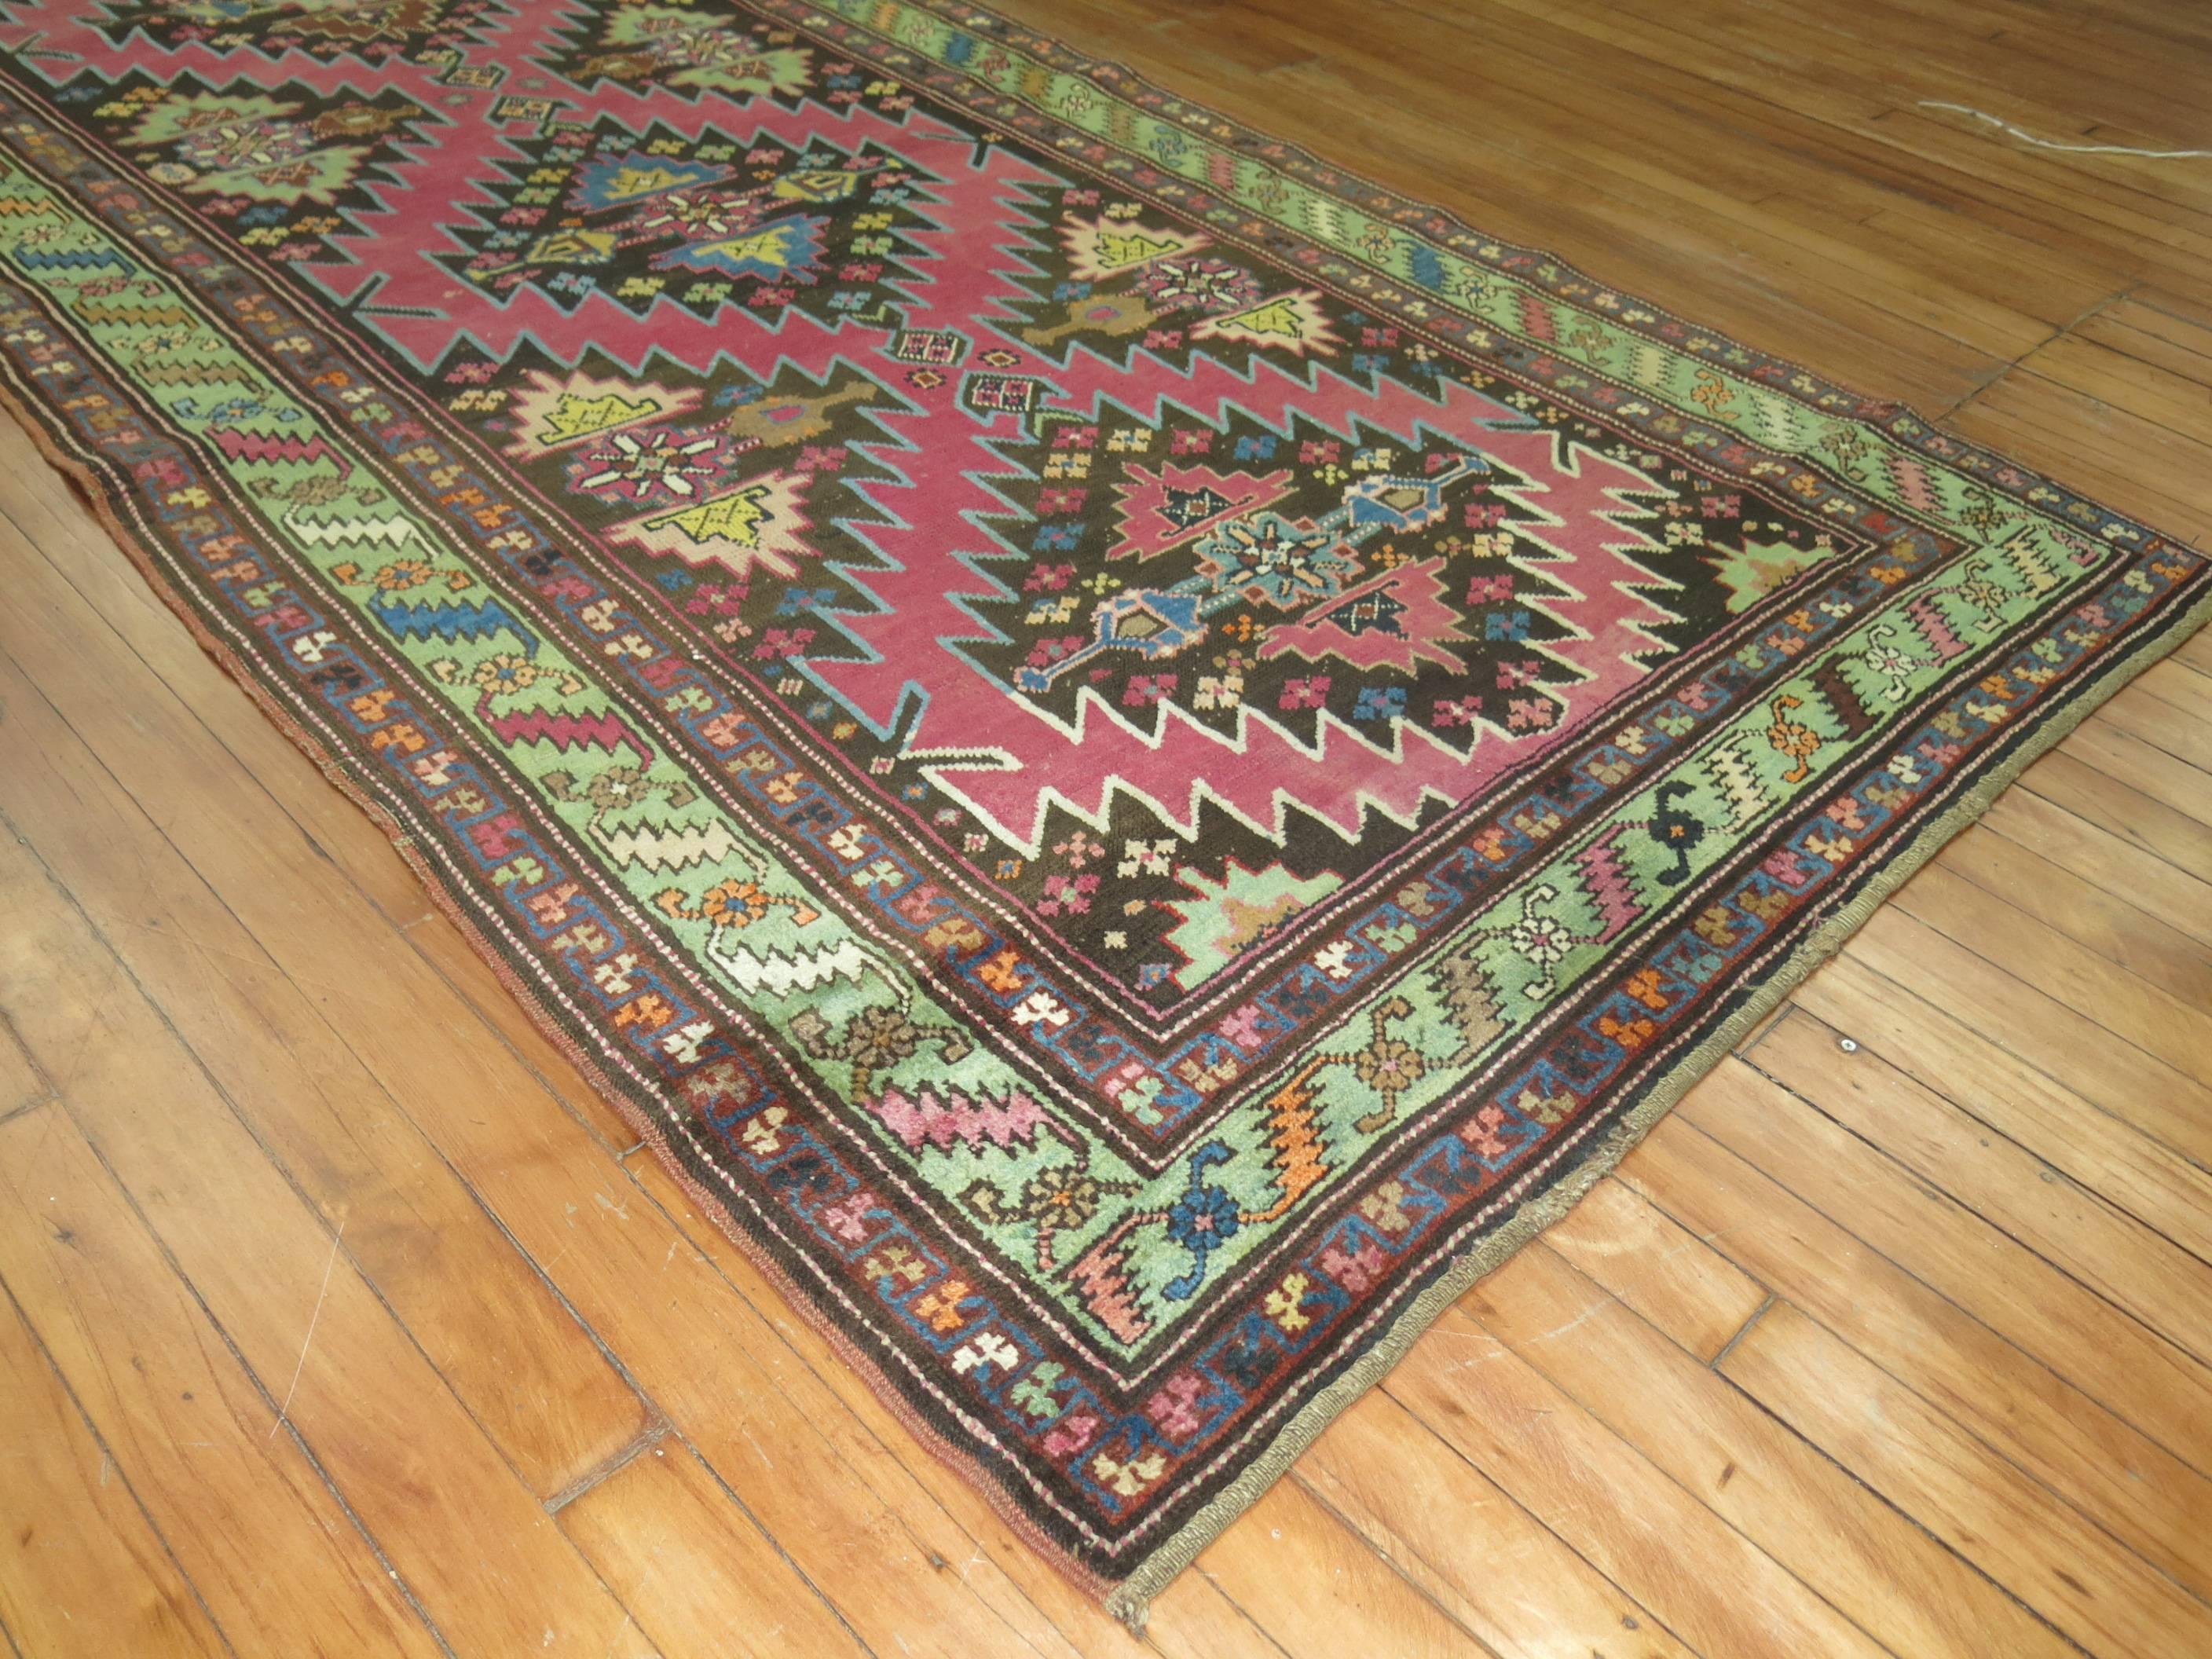 Vintage Karabagh runner predominant accents in pink and chartreuse on a brown colored ground.

3'10'' x 12'9''

Karabagh are one of the more popular types of Caucasian rugs that were woven on the higher mountain regions of the Caucasus villages that